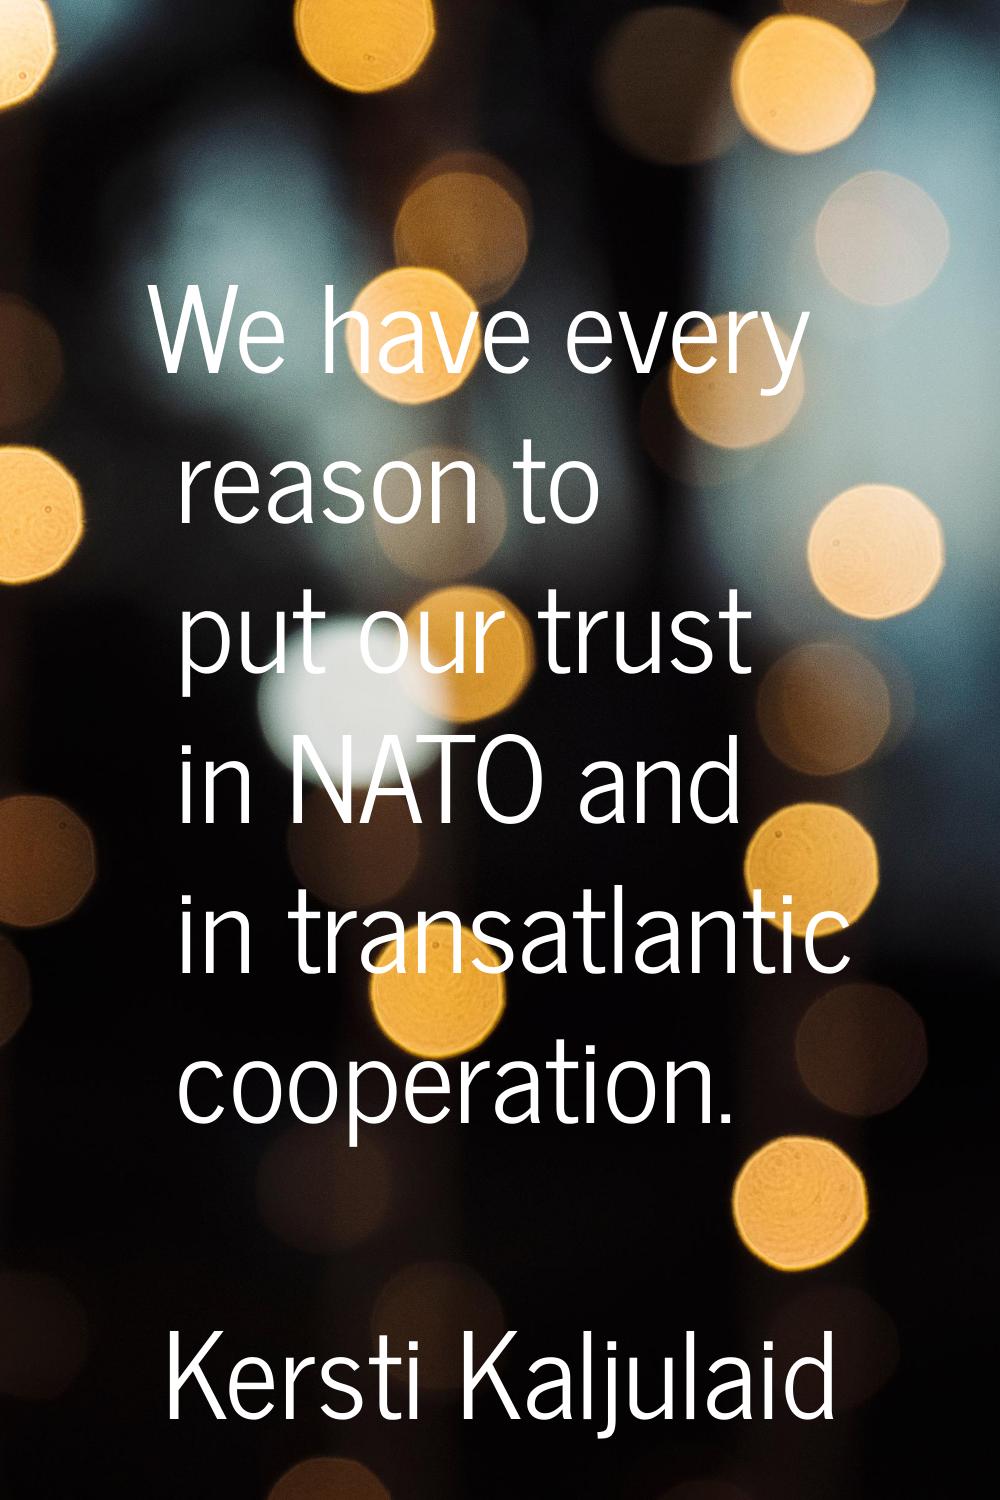 We have every reason to put our trust in NATO and in transatlantic cooperation.